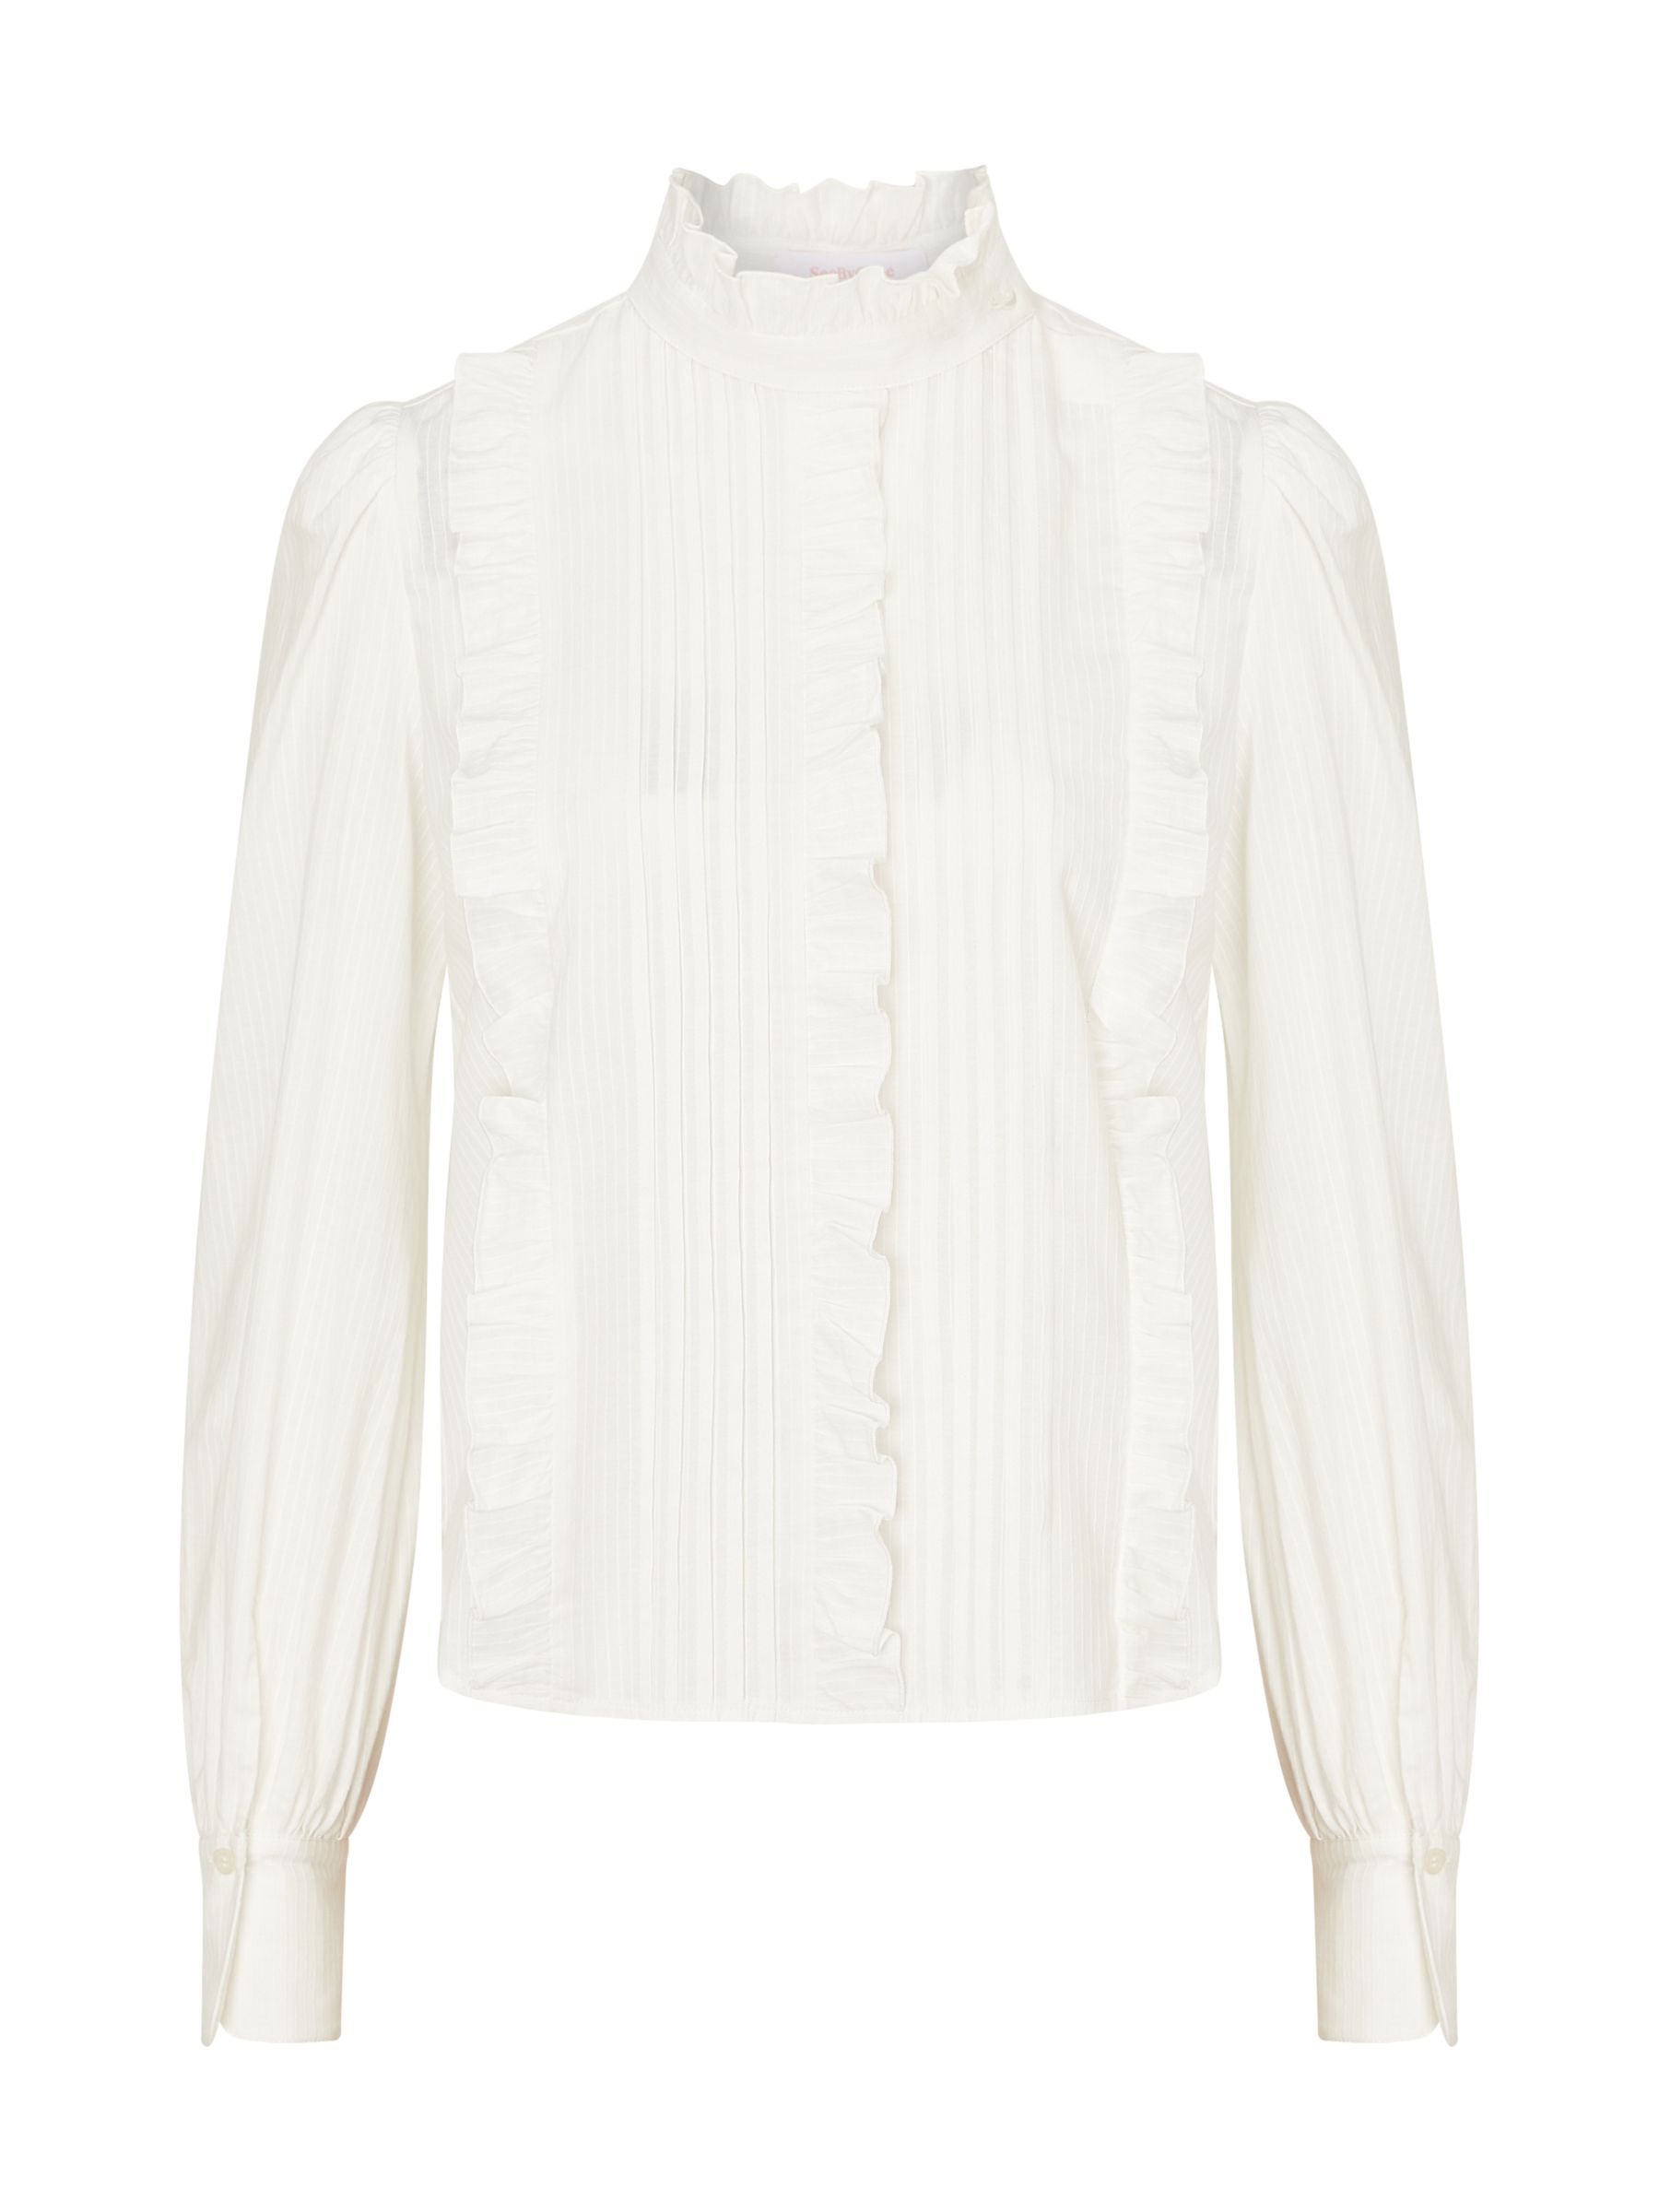 See By Chloé High Neck Ruffle Blouse, Iconic Milk at John Lewis & Partners